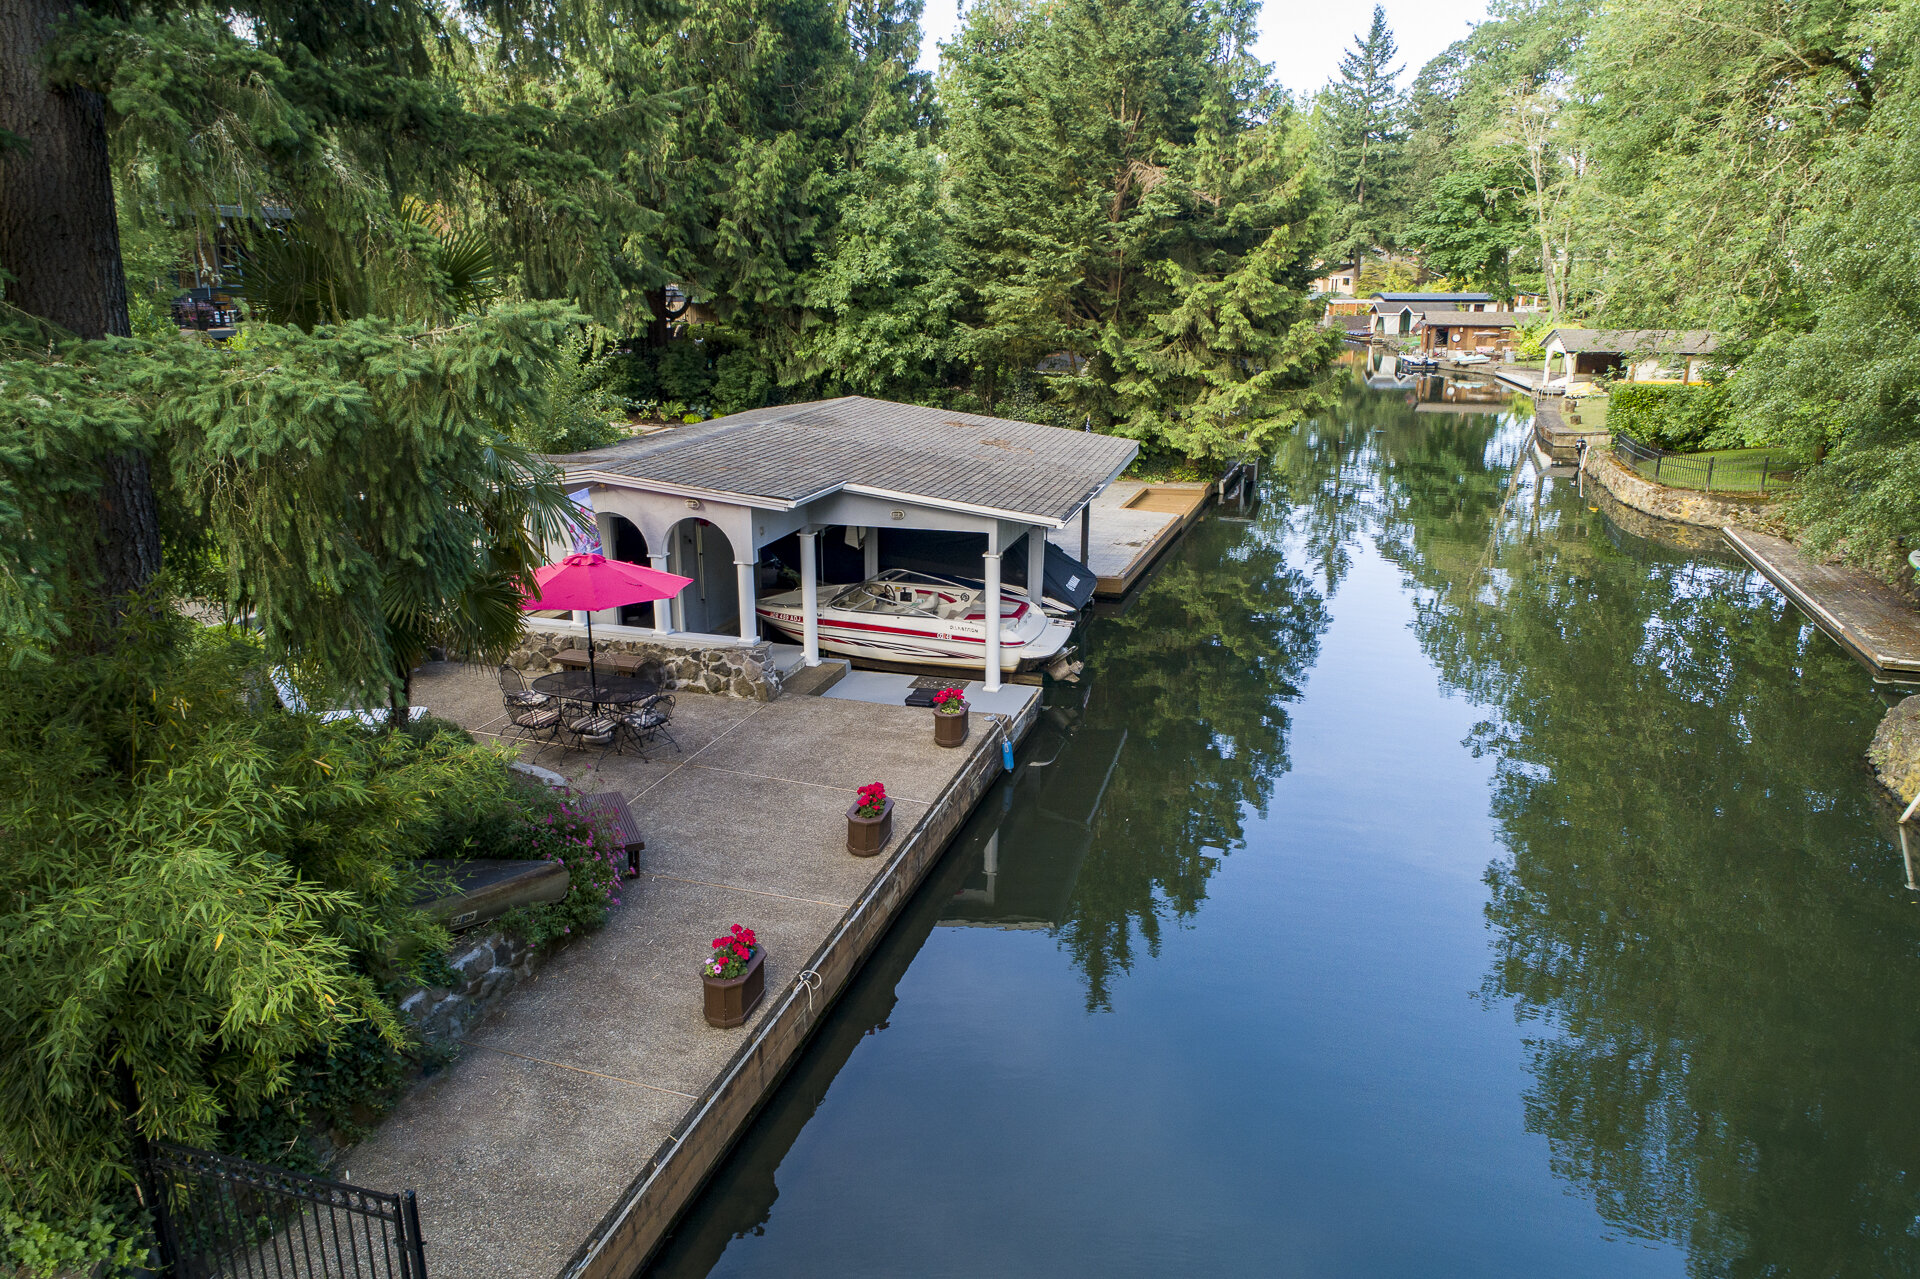 The canal by Lake Oswego